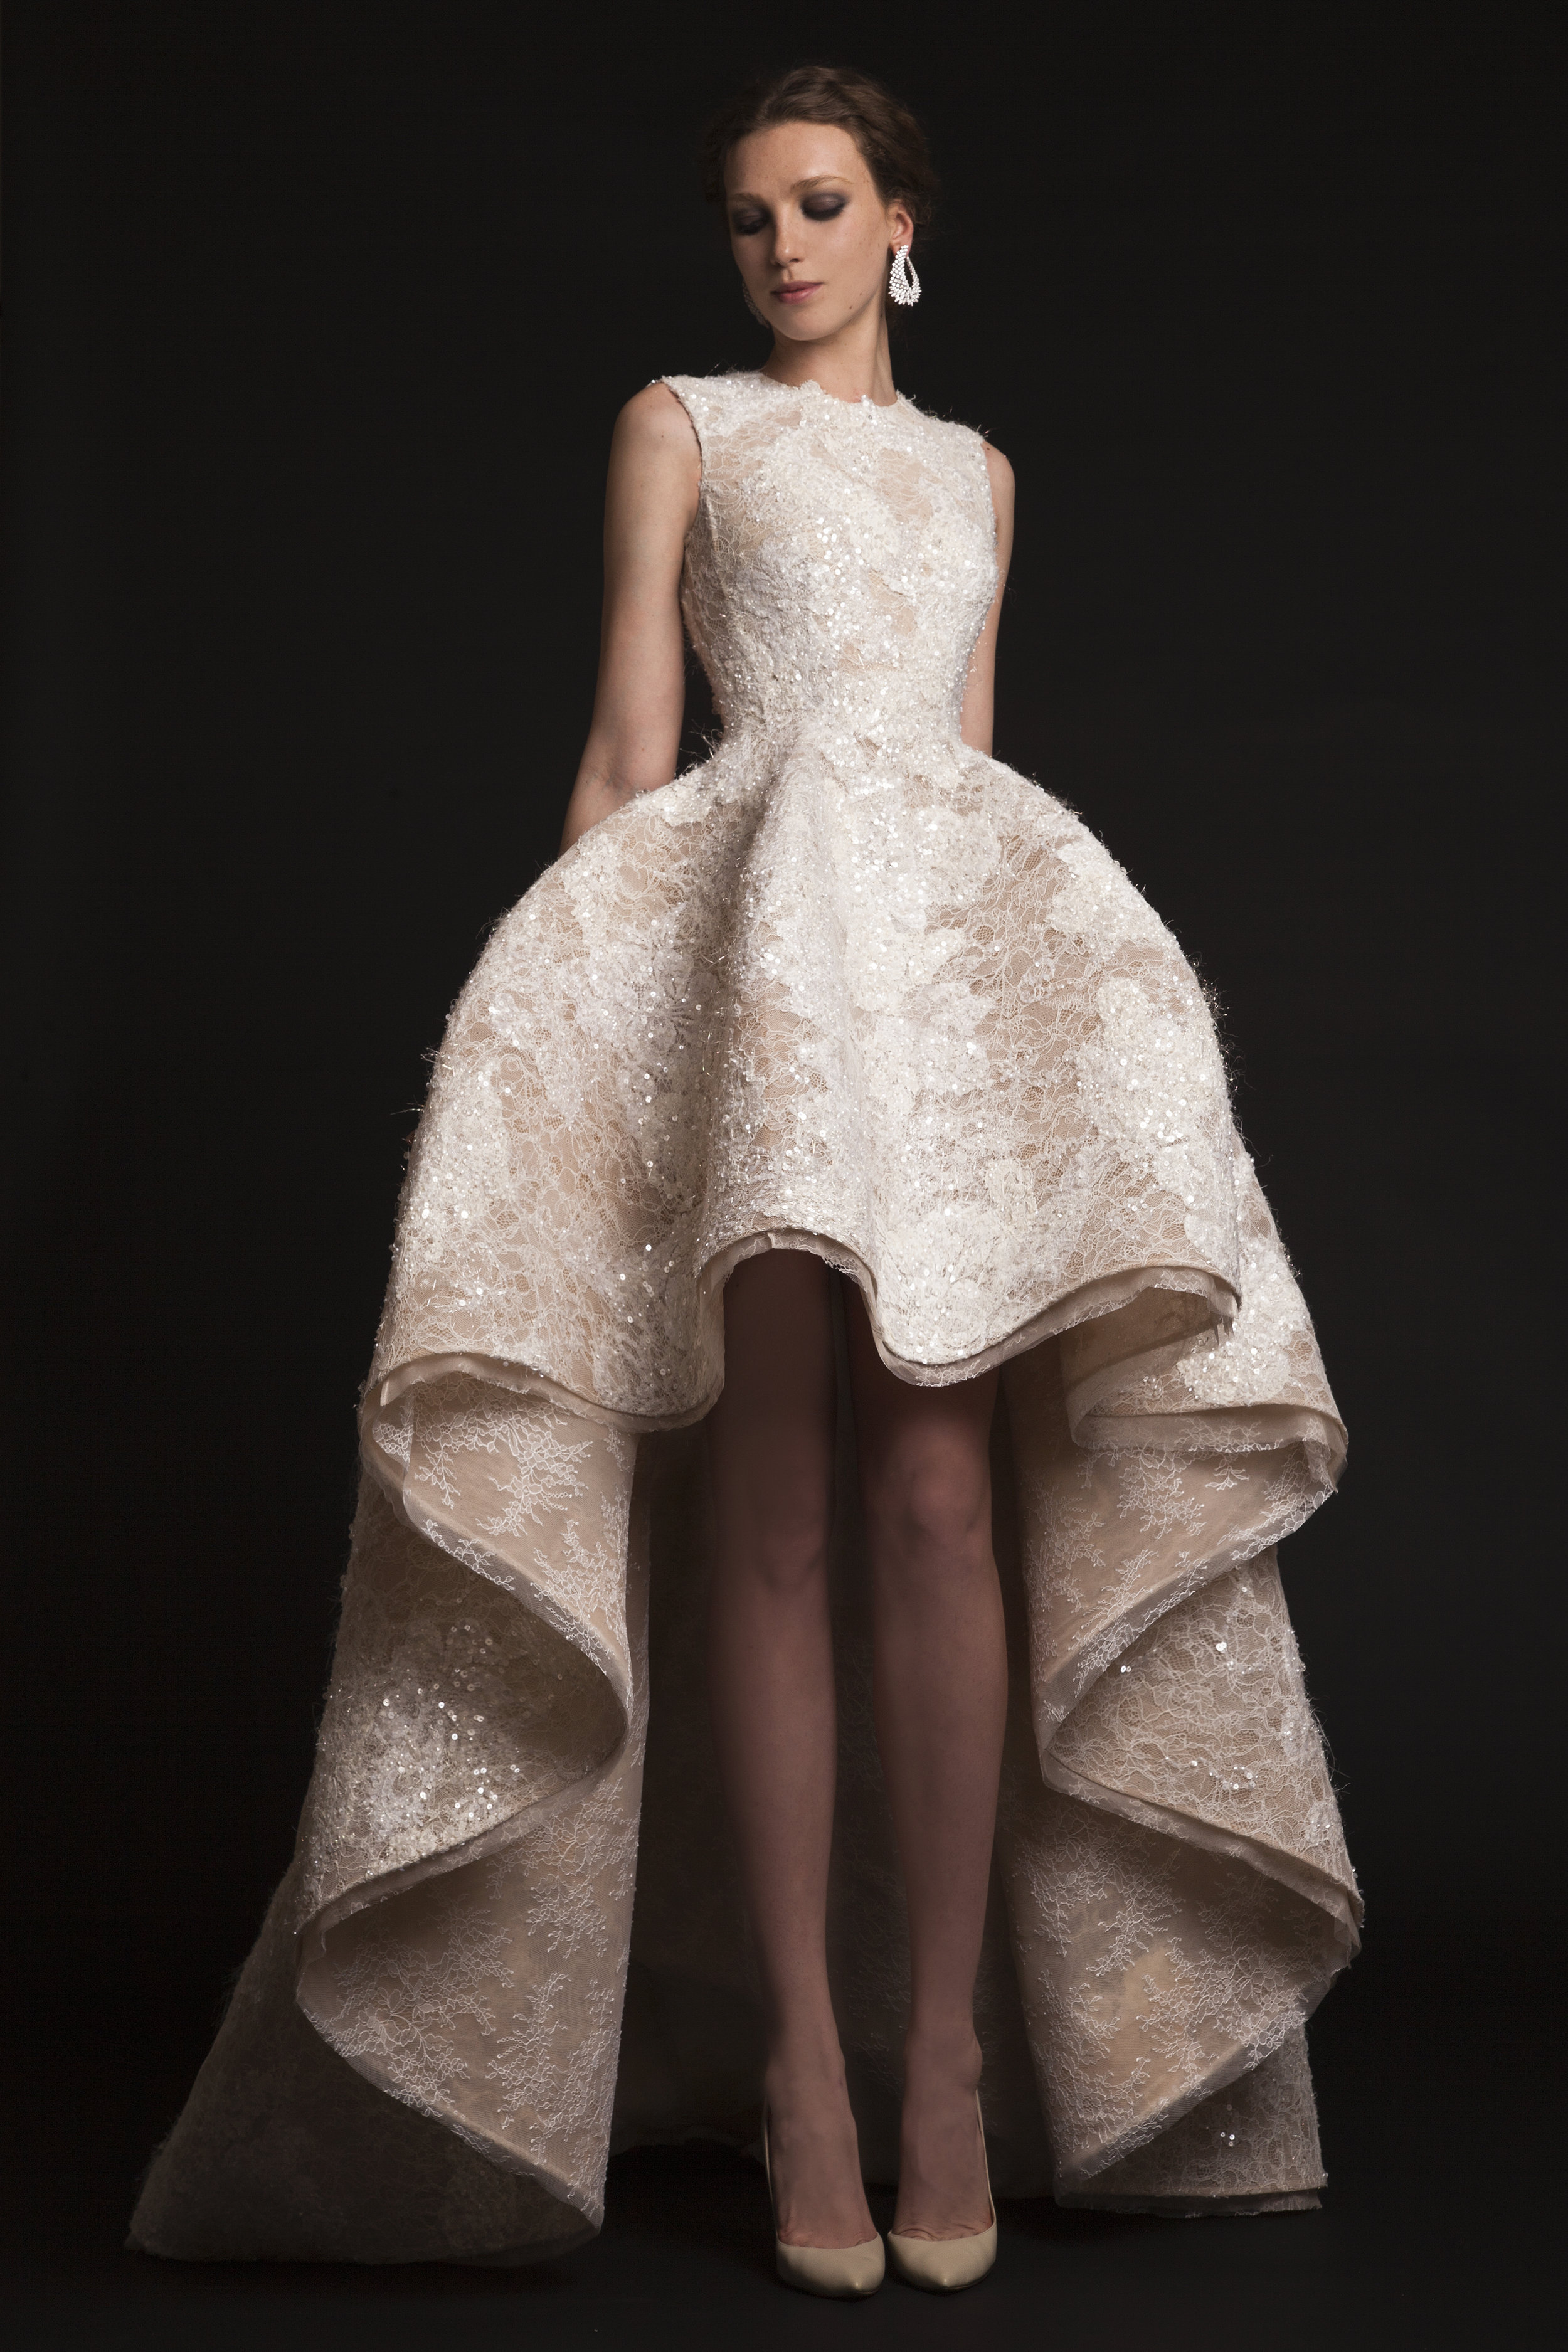 Here's All You Need to Know About Cre Designer Krikor Jabotian